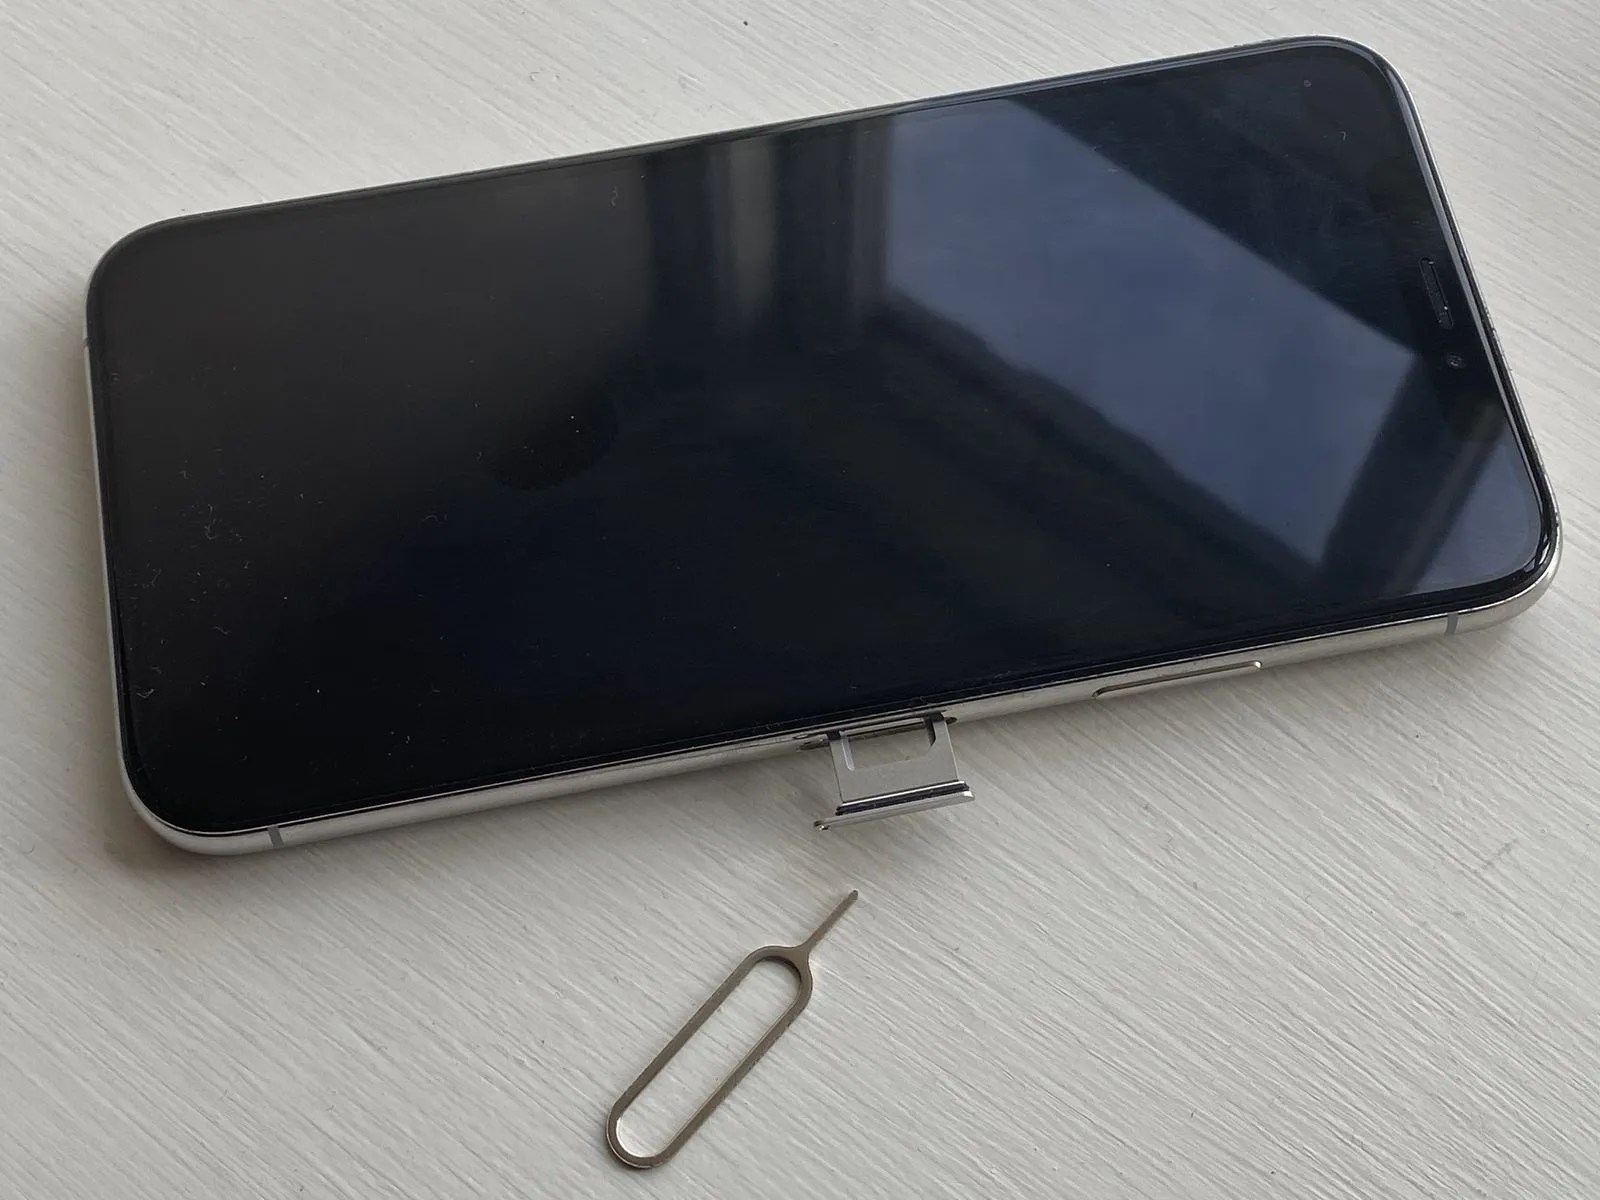 How to Open an iPhone SIM Card Without an Ejector Tool